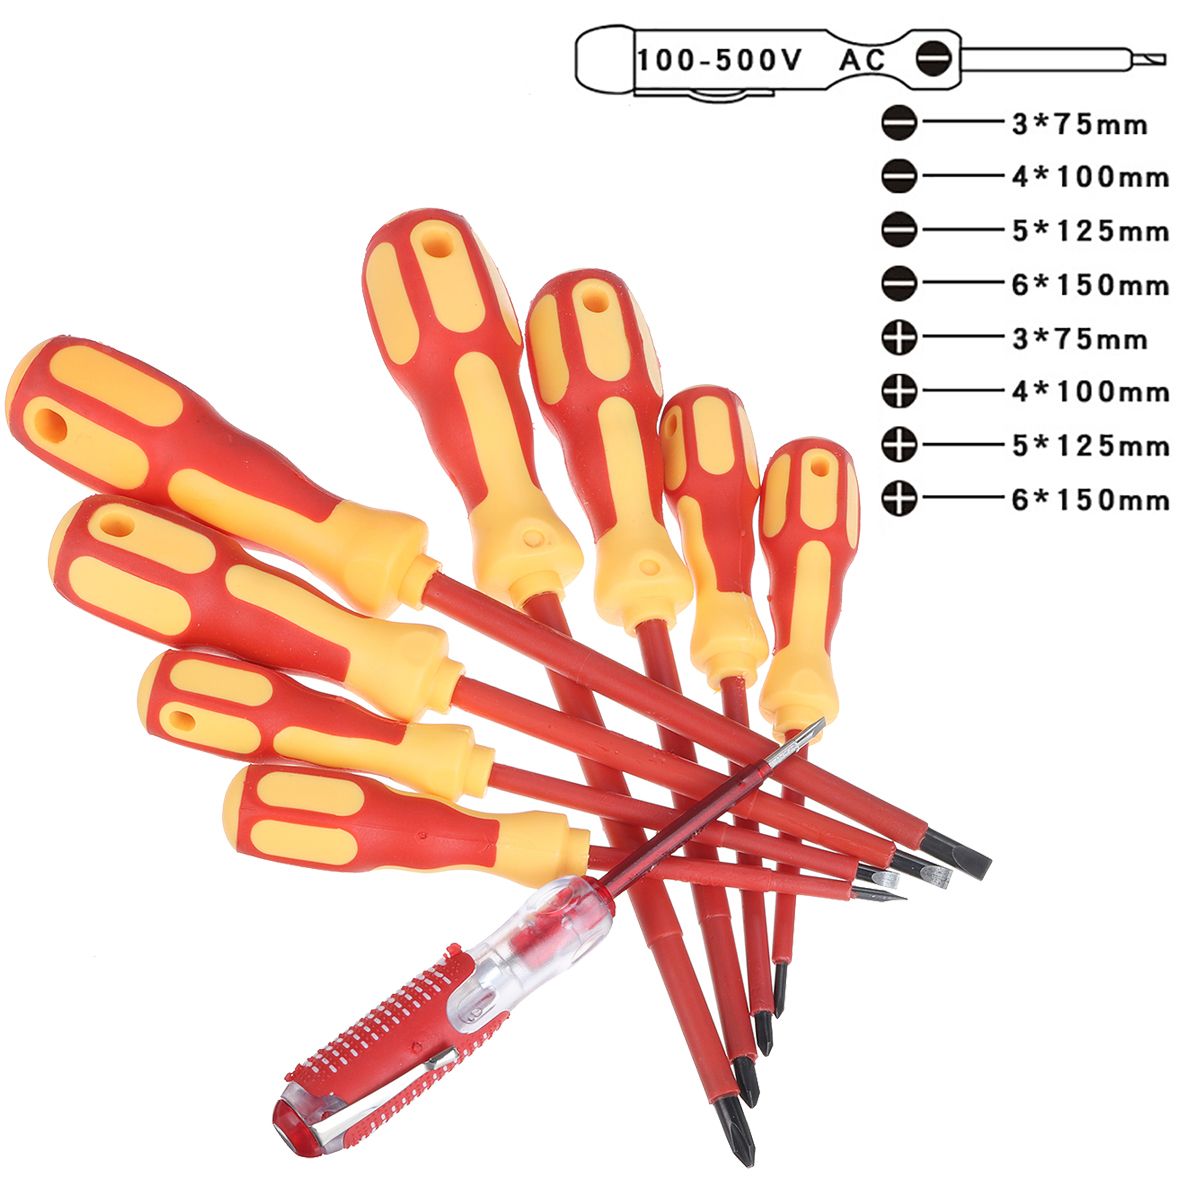 9Pcs-Electricians-Insulated-Magnetic-Screwdrivers-Hand-Screwdriver-Tools-Set-Multifunctional-Insulat-1652983